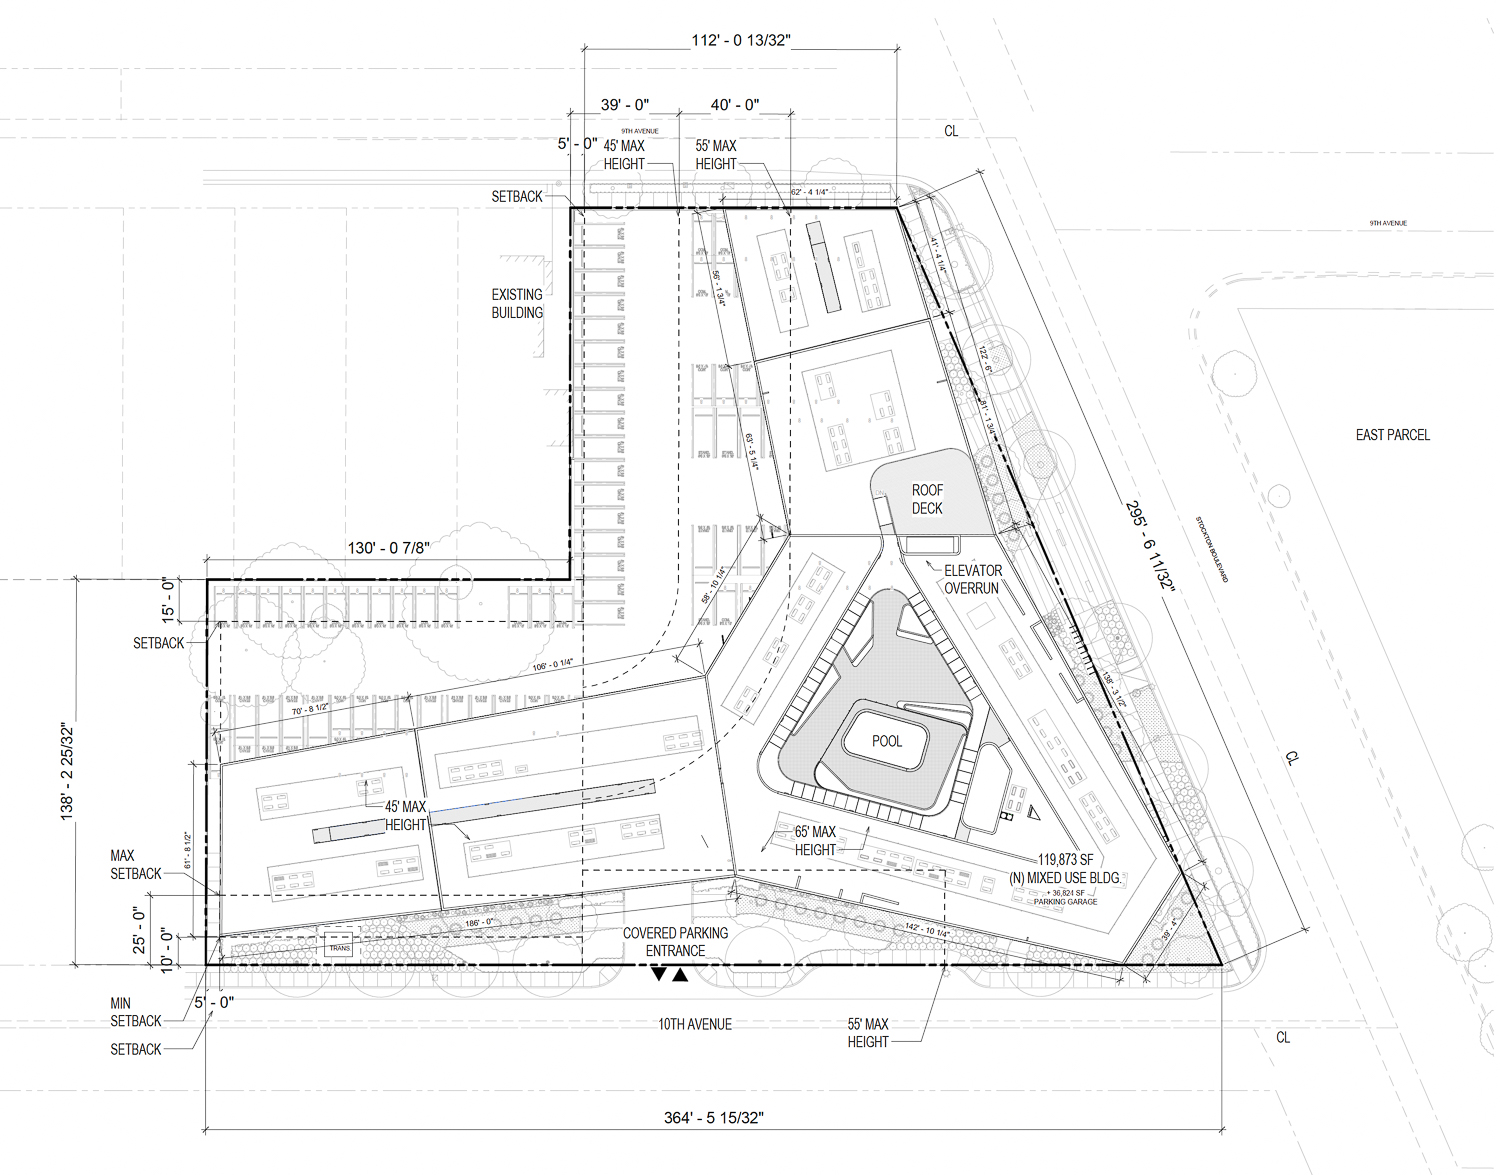 4601 10th Avenue site map, illustration by LOHA Architects